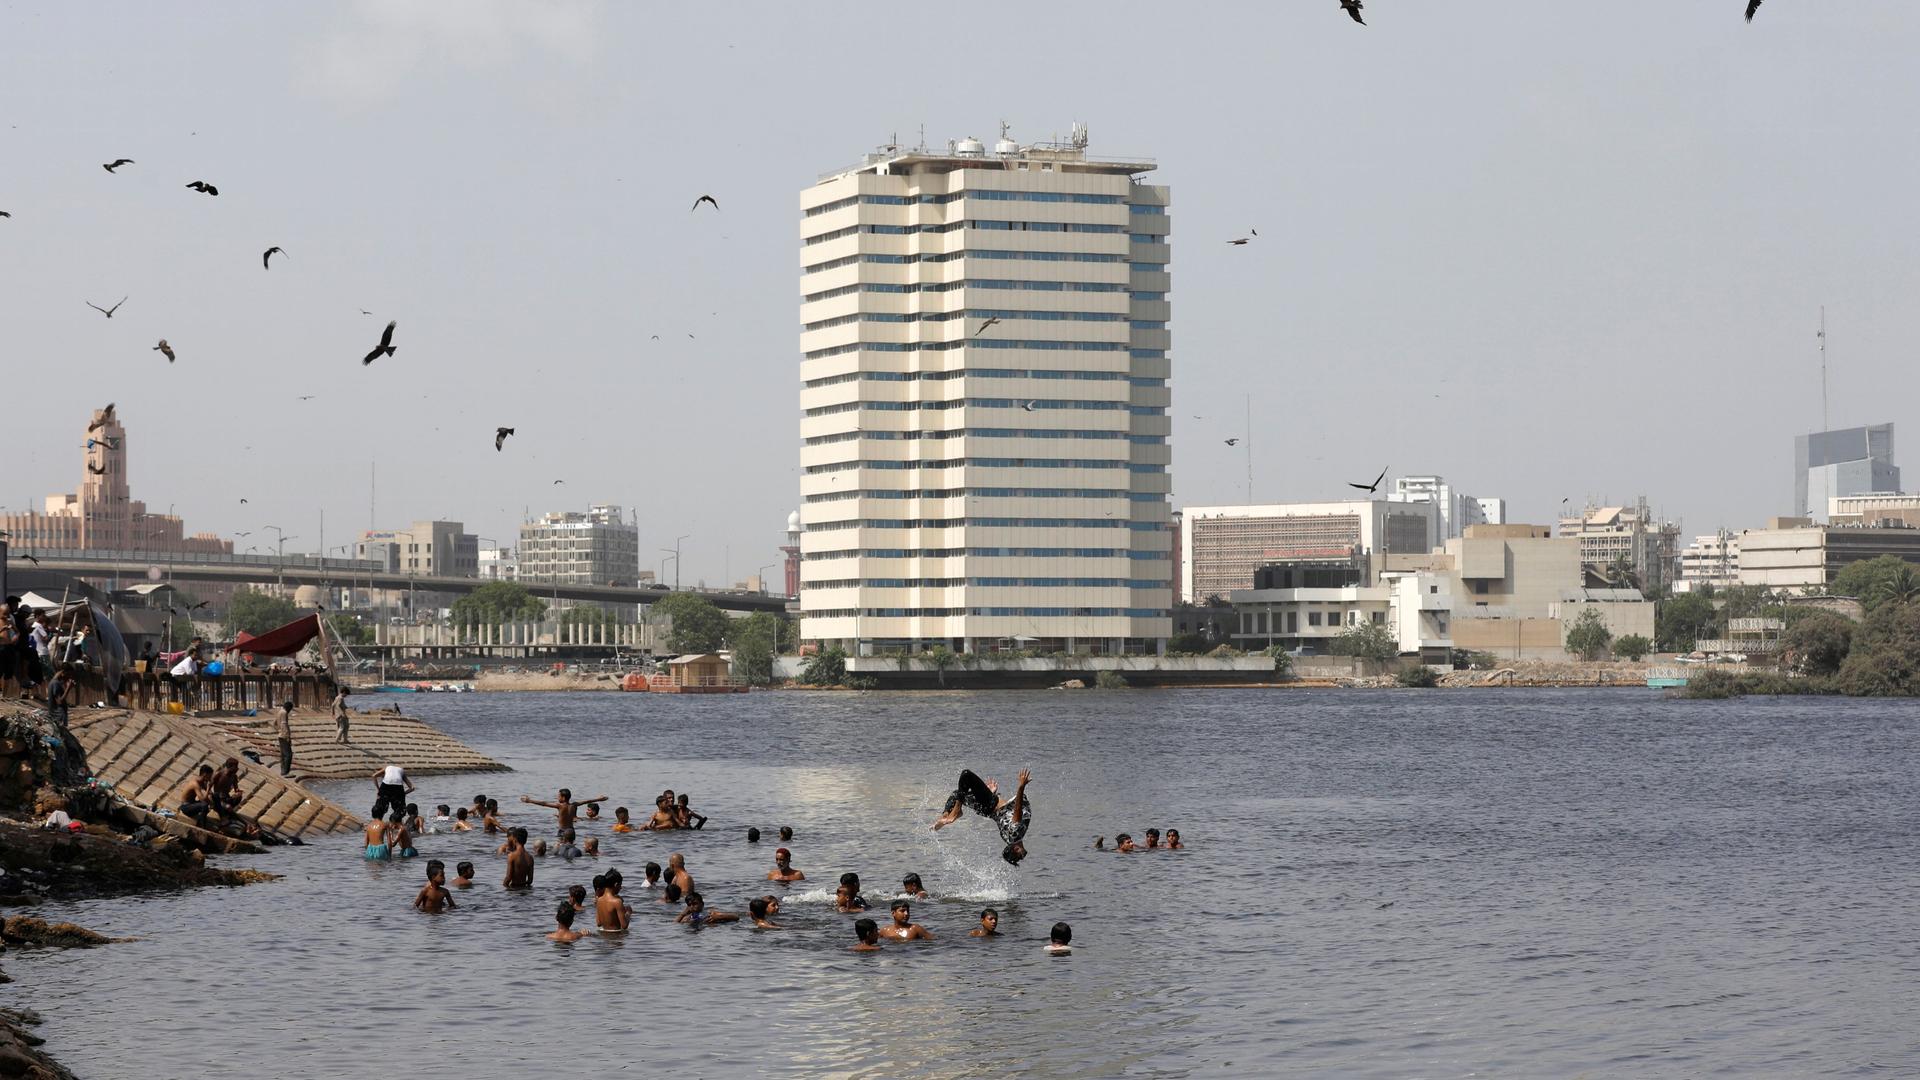 Adults and children swim in water near a large, white building in the background and birds flying overhead